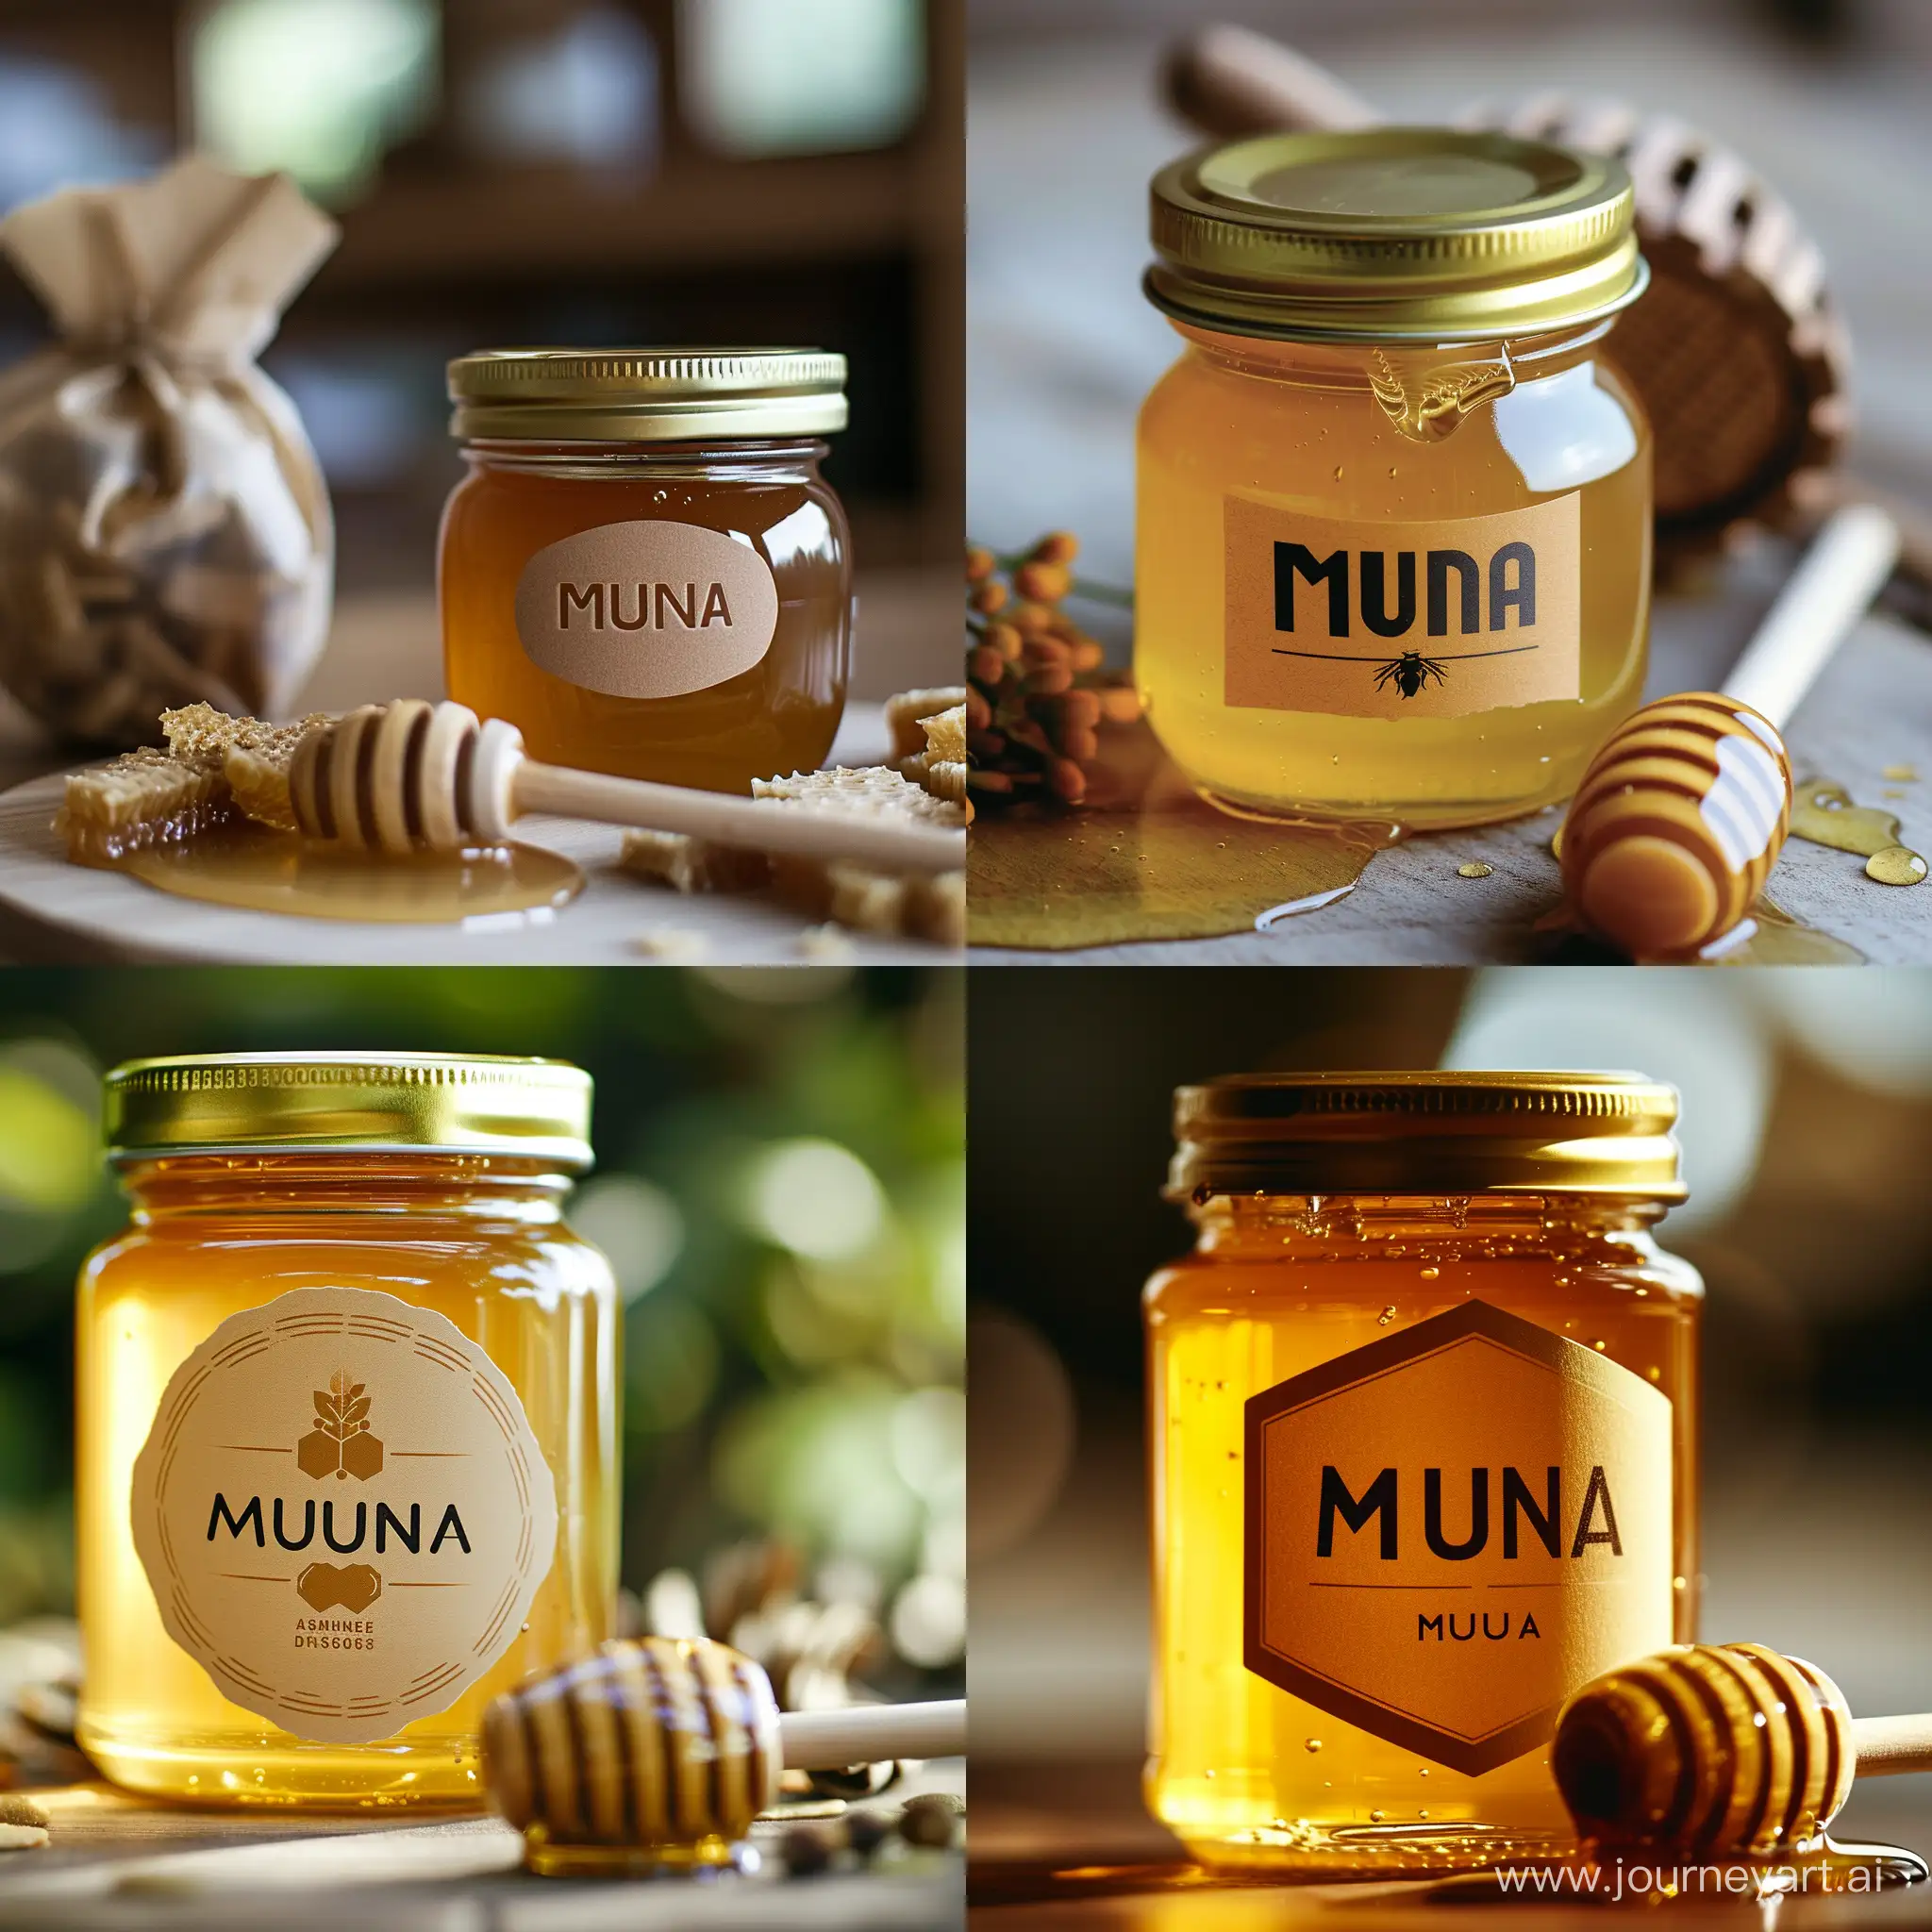 Muna logo and honey on a jar package